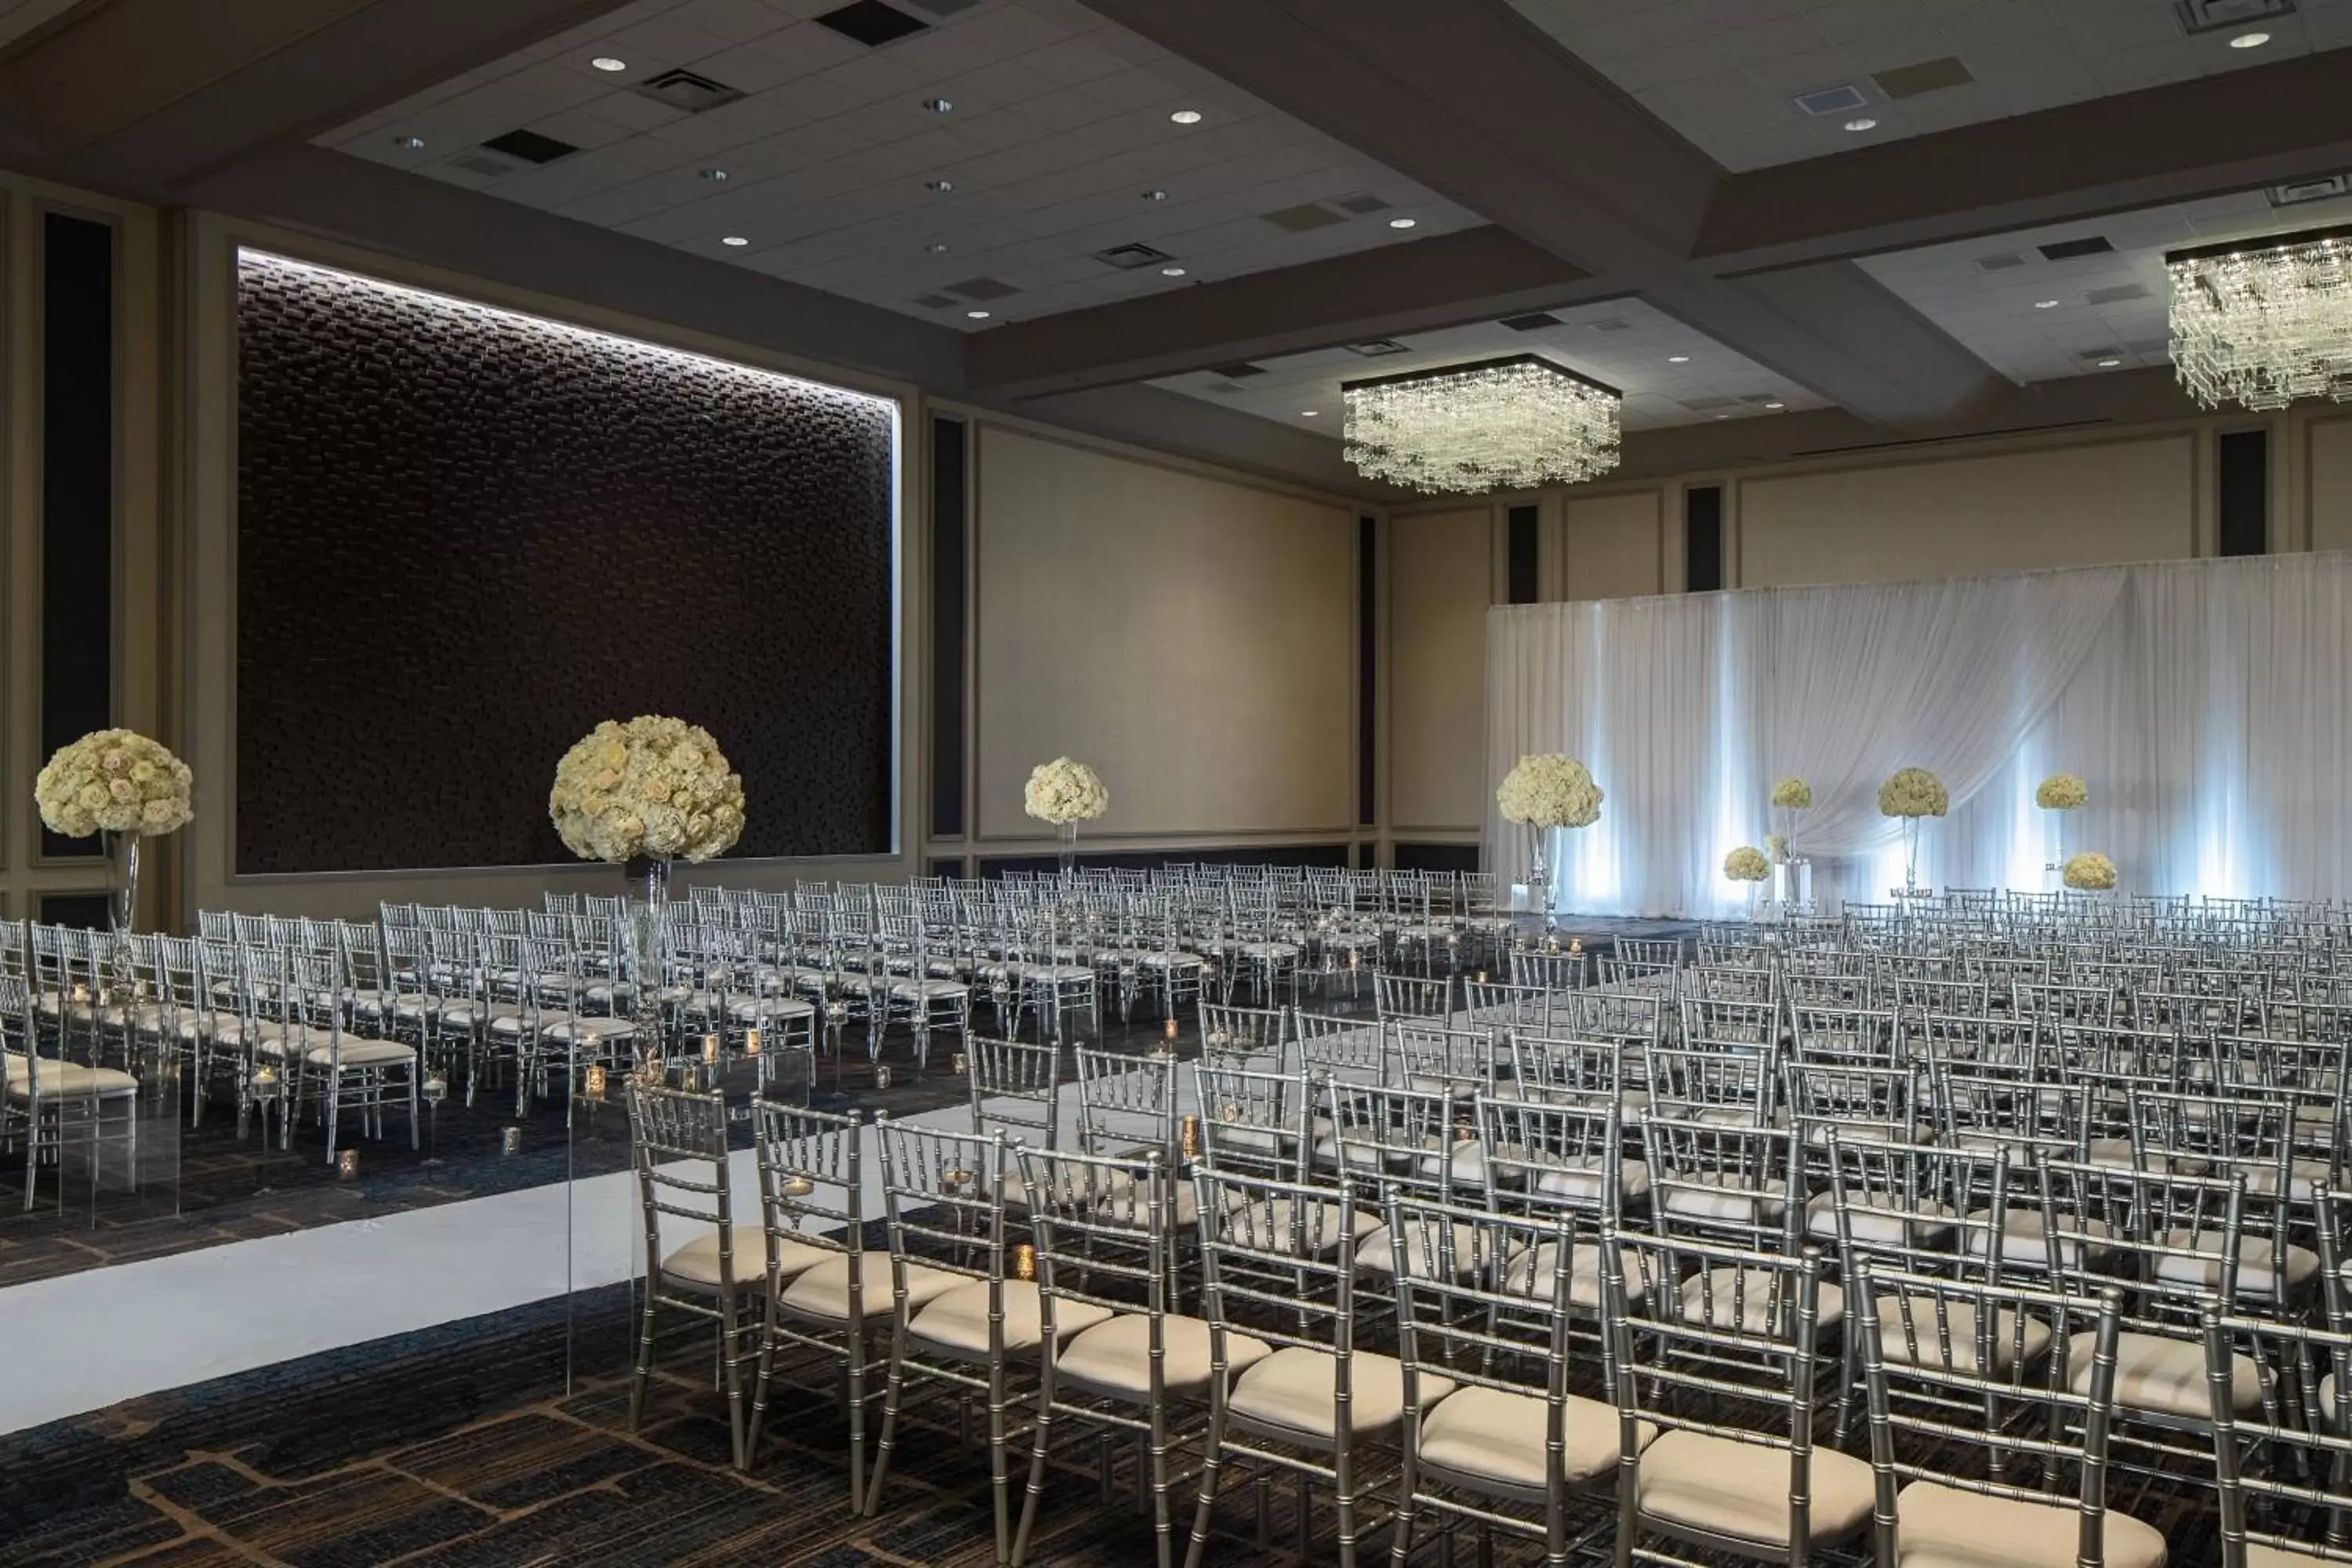 Banquet/Function facilities, Banquet Facilities in Chicago Marriott Downtown Magnificent Mile